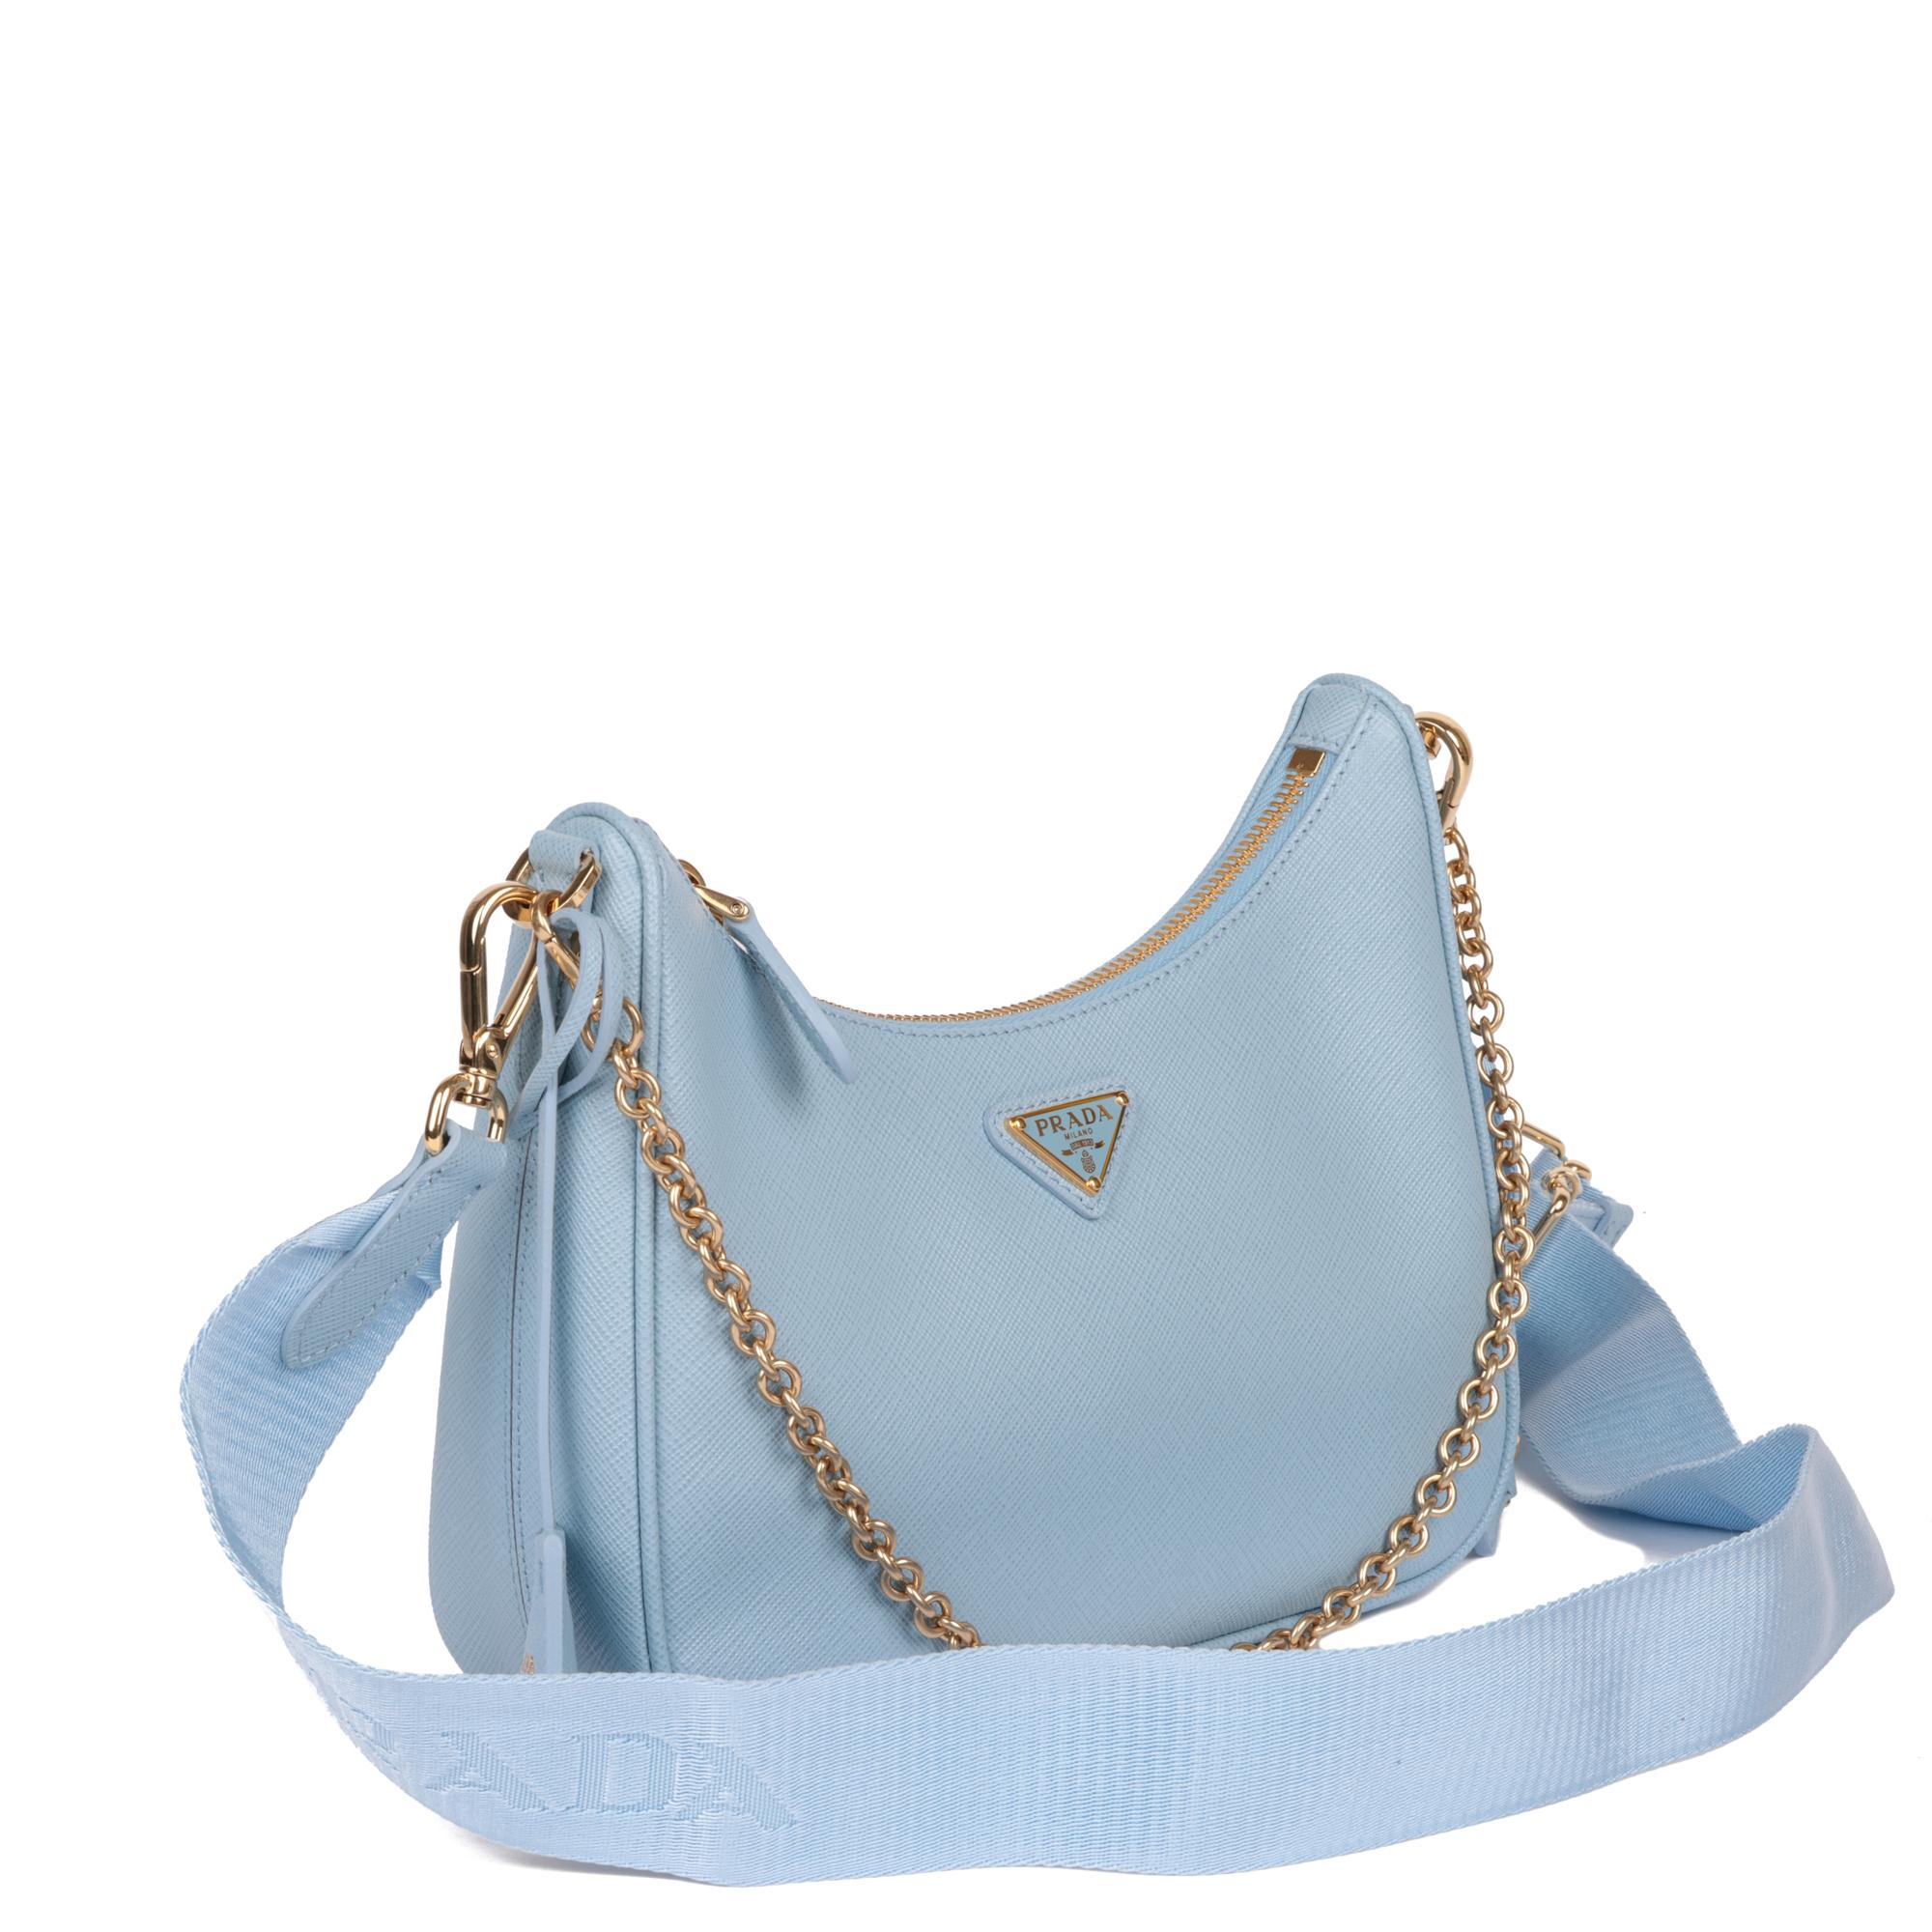 PRADA
Pale Blue Saffiano Leather Re-Edition 2005 Multi Bag

Xupes Reference: HB5171
Serial Number: 25
Age (Circa): 2020
Accompanied By: Prada Dust Bag, Care Booklet, Clochette
Authenticity Details: Serial Sticker (Made Italy) 
Gender: Ladies
Type: